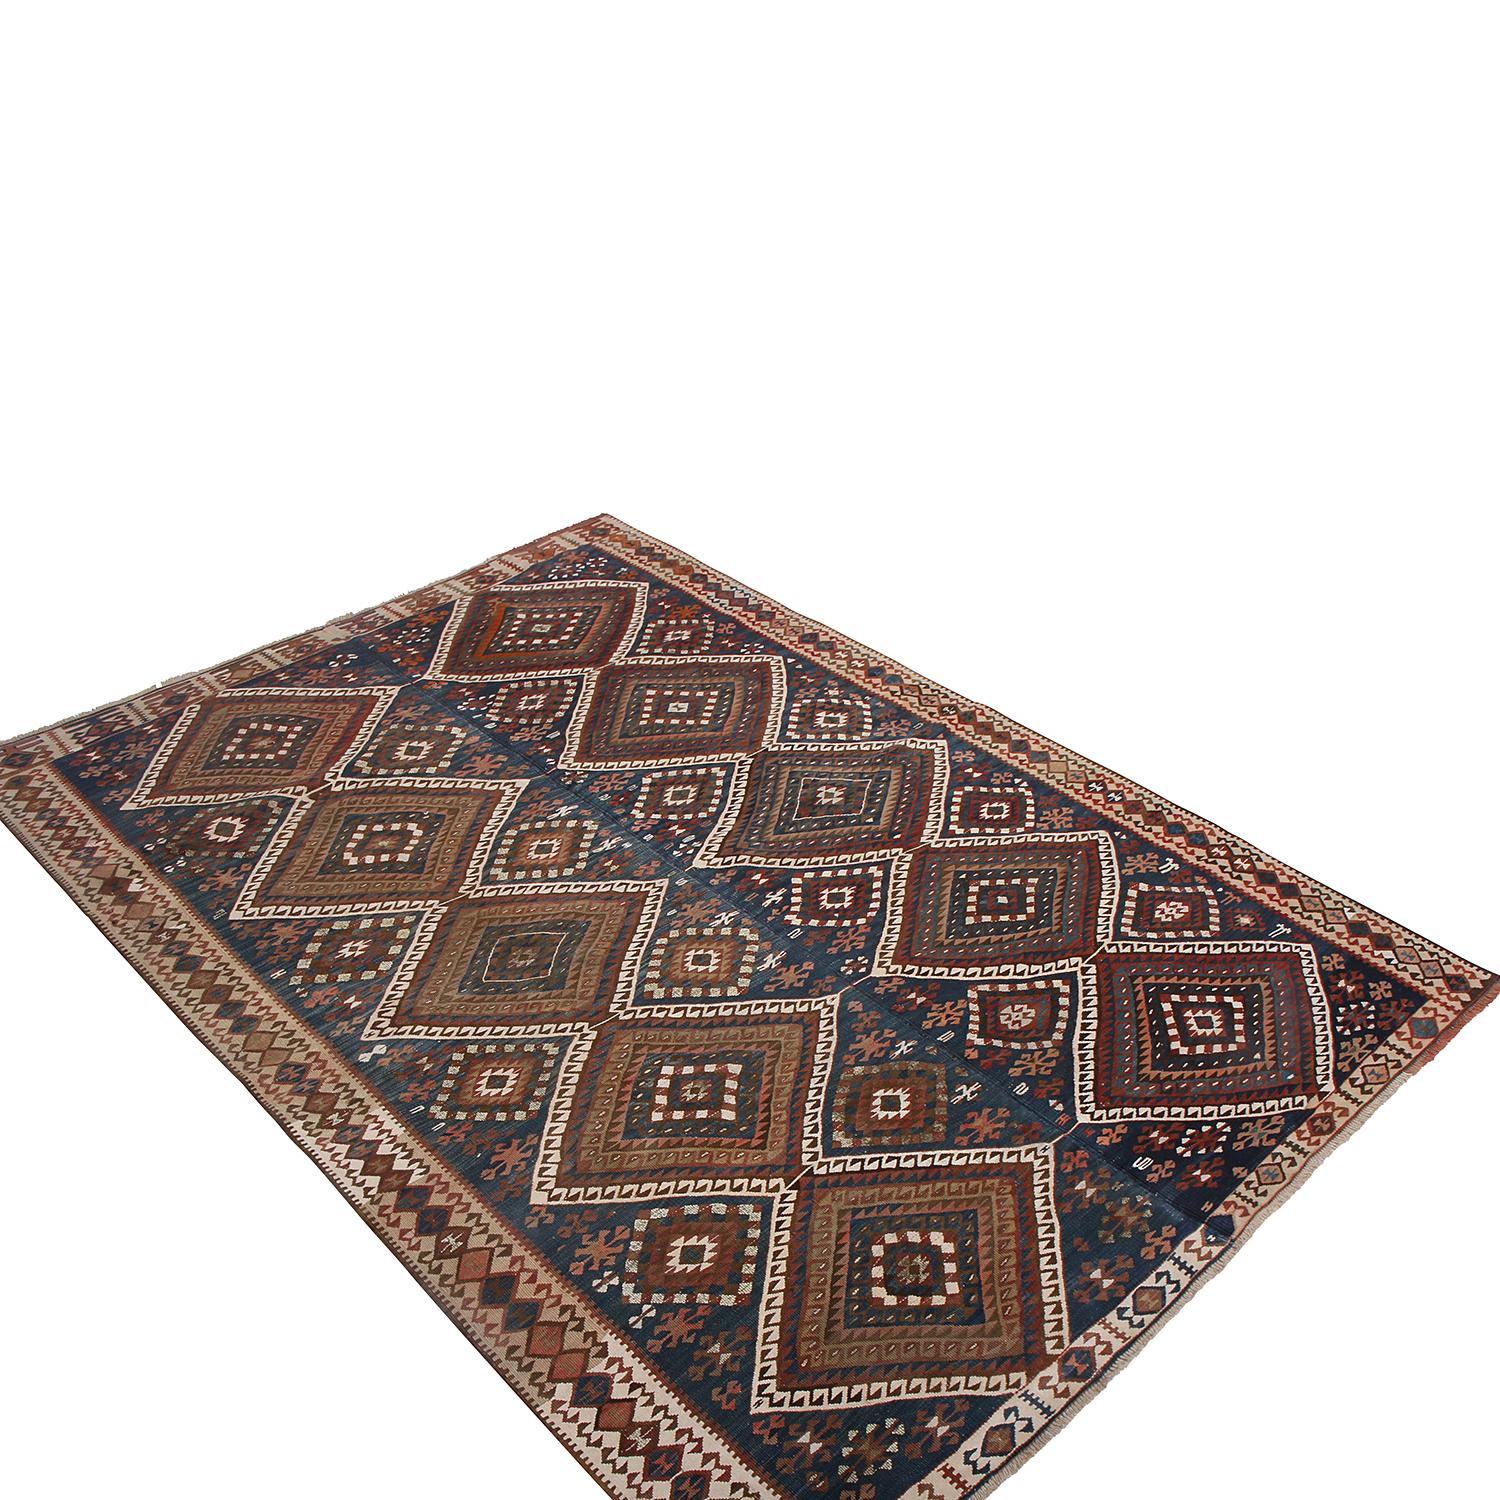 Handwoven in Turkey originating between 1950-1960, this vintage midcentury wool Kilim hails from the city of Van, named for the titular province in Eastern Anatolia and home to a distinguished history of rare selections. This particular piece enjoys